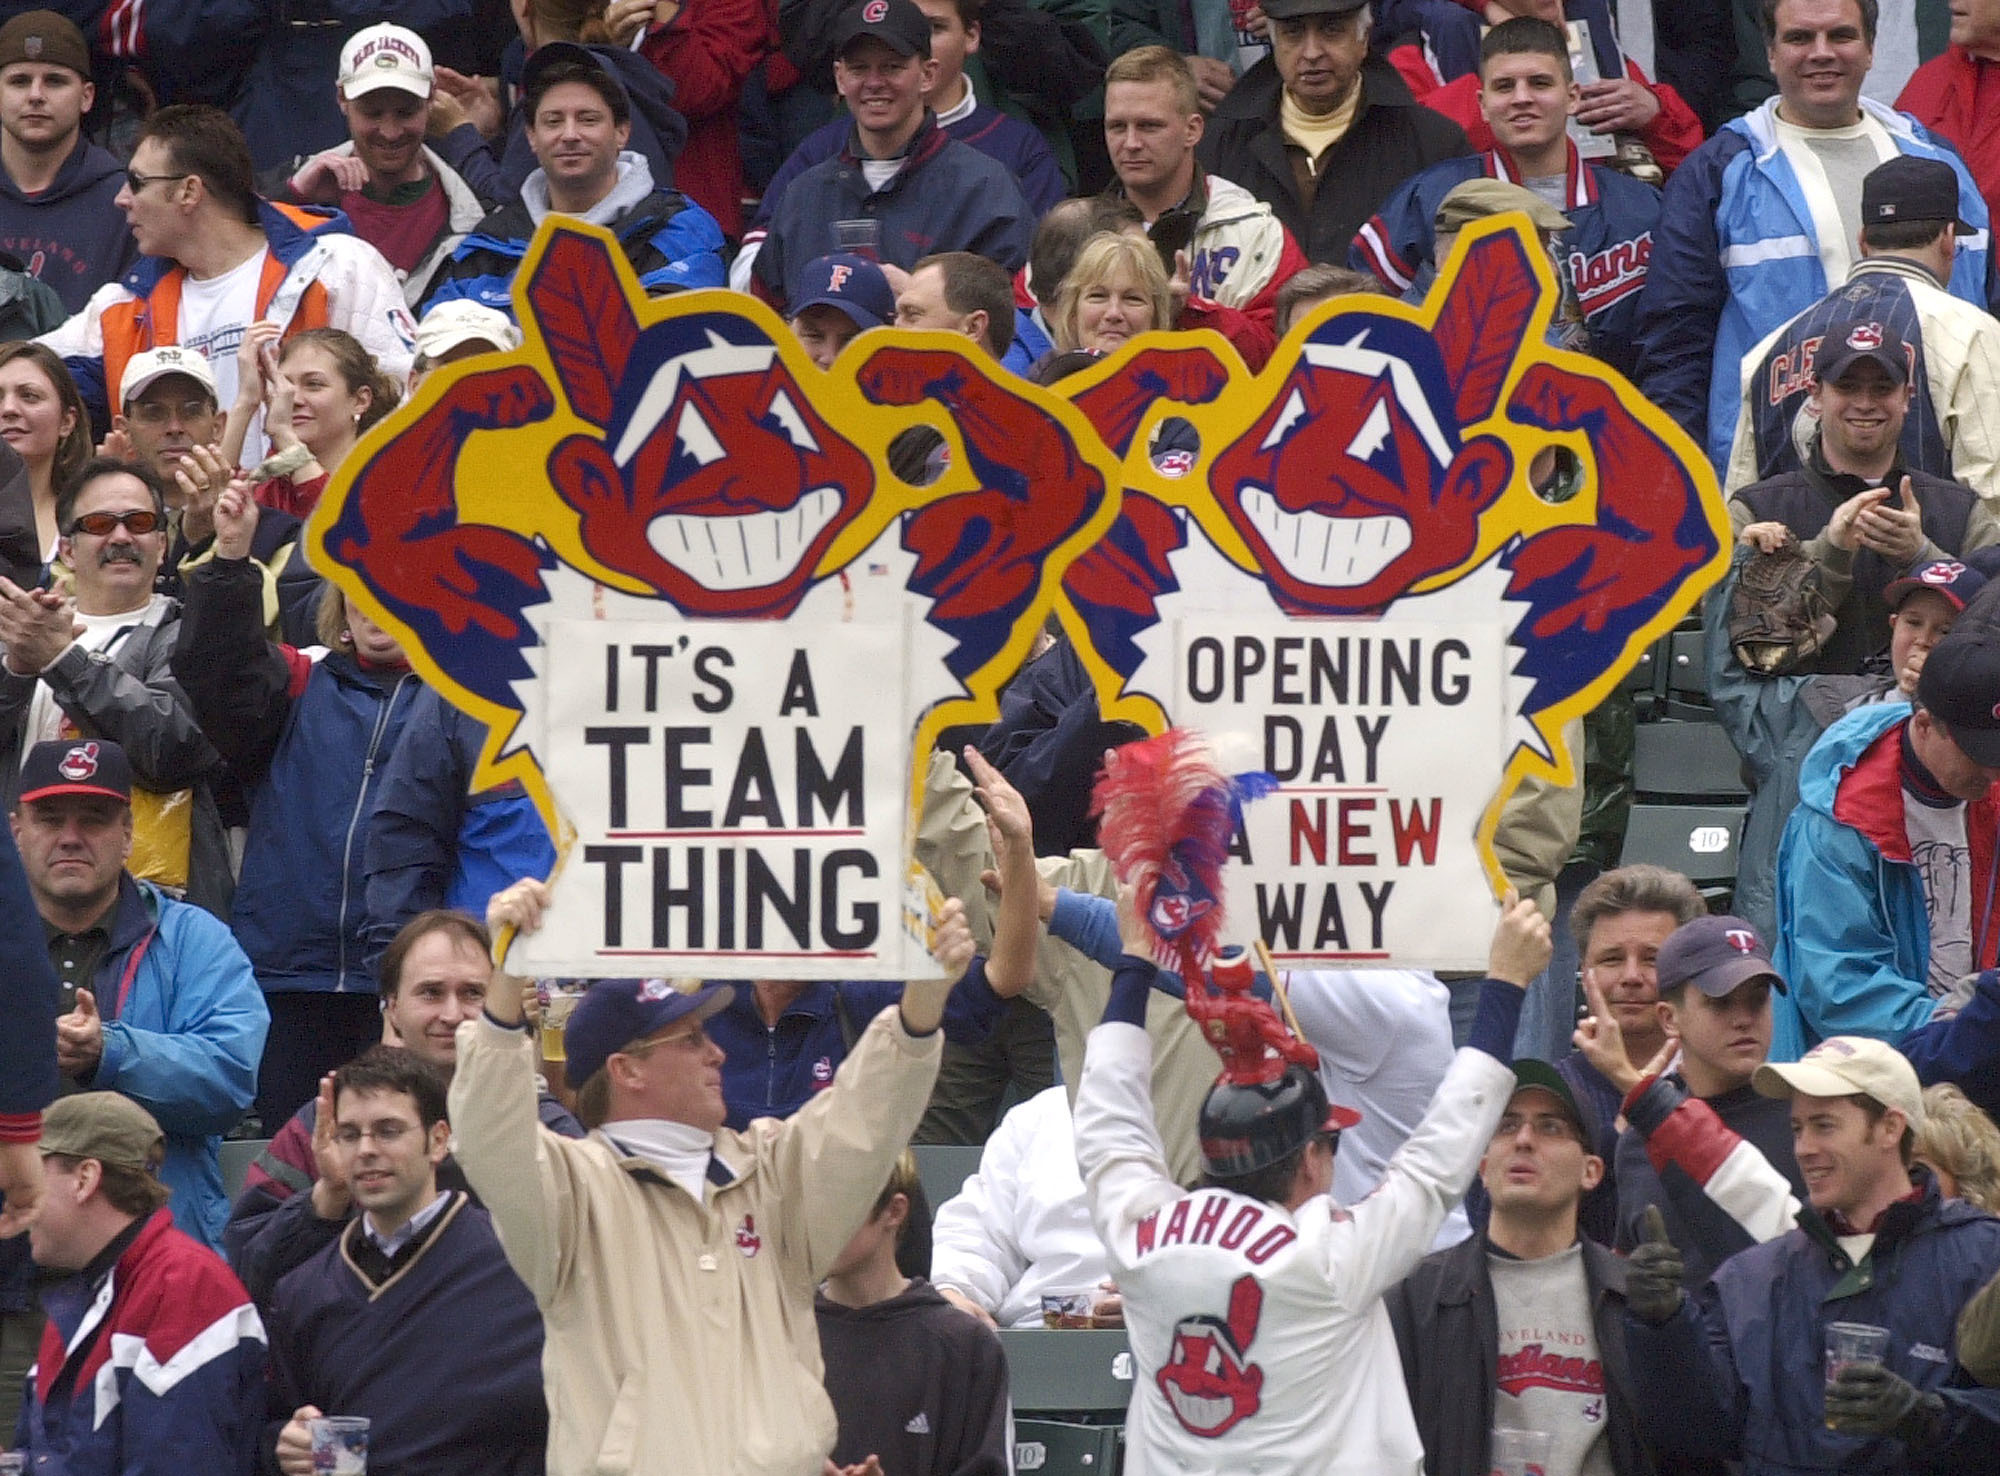 How racist is the Cleveland Indians' mascot? Very.